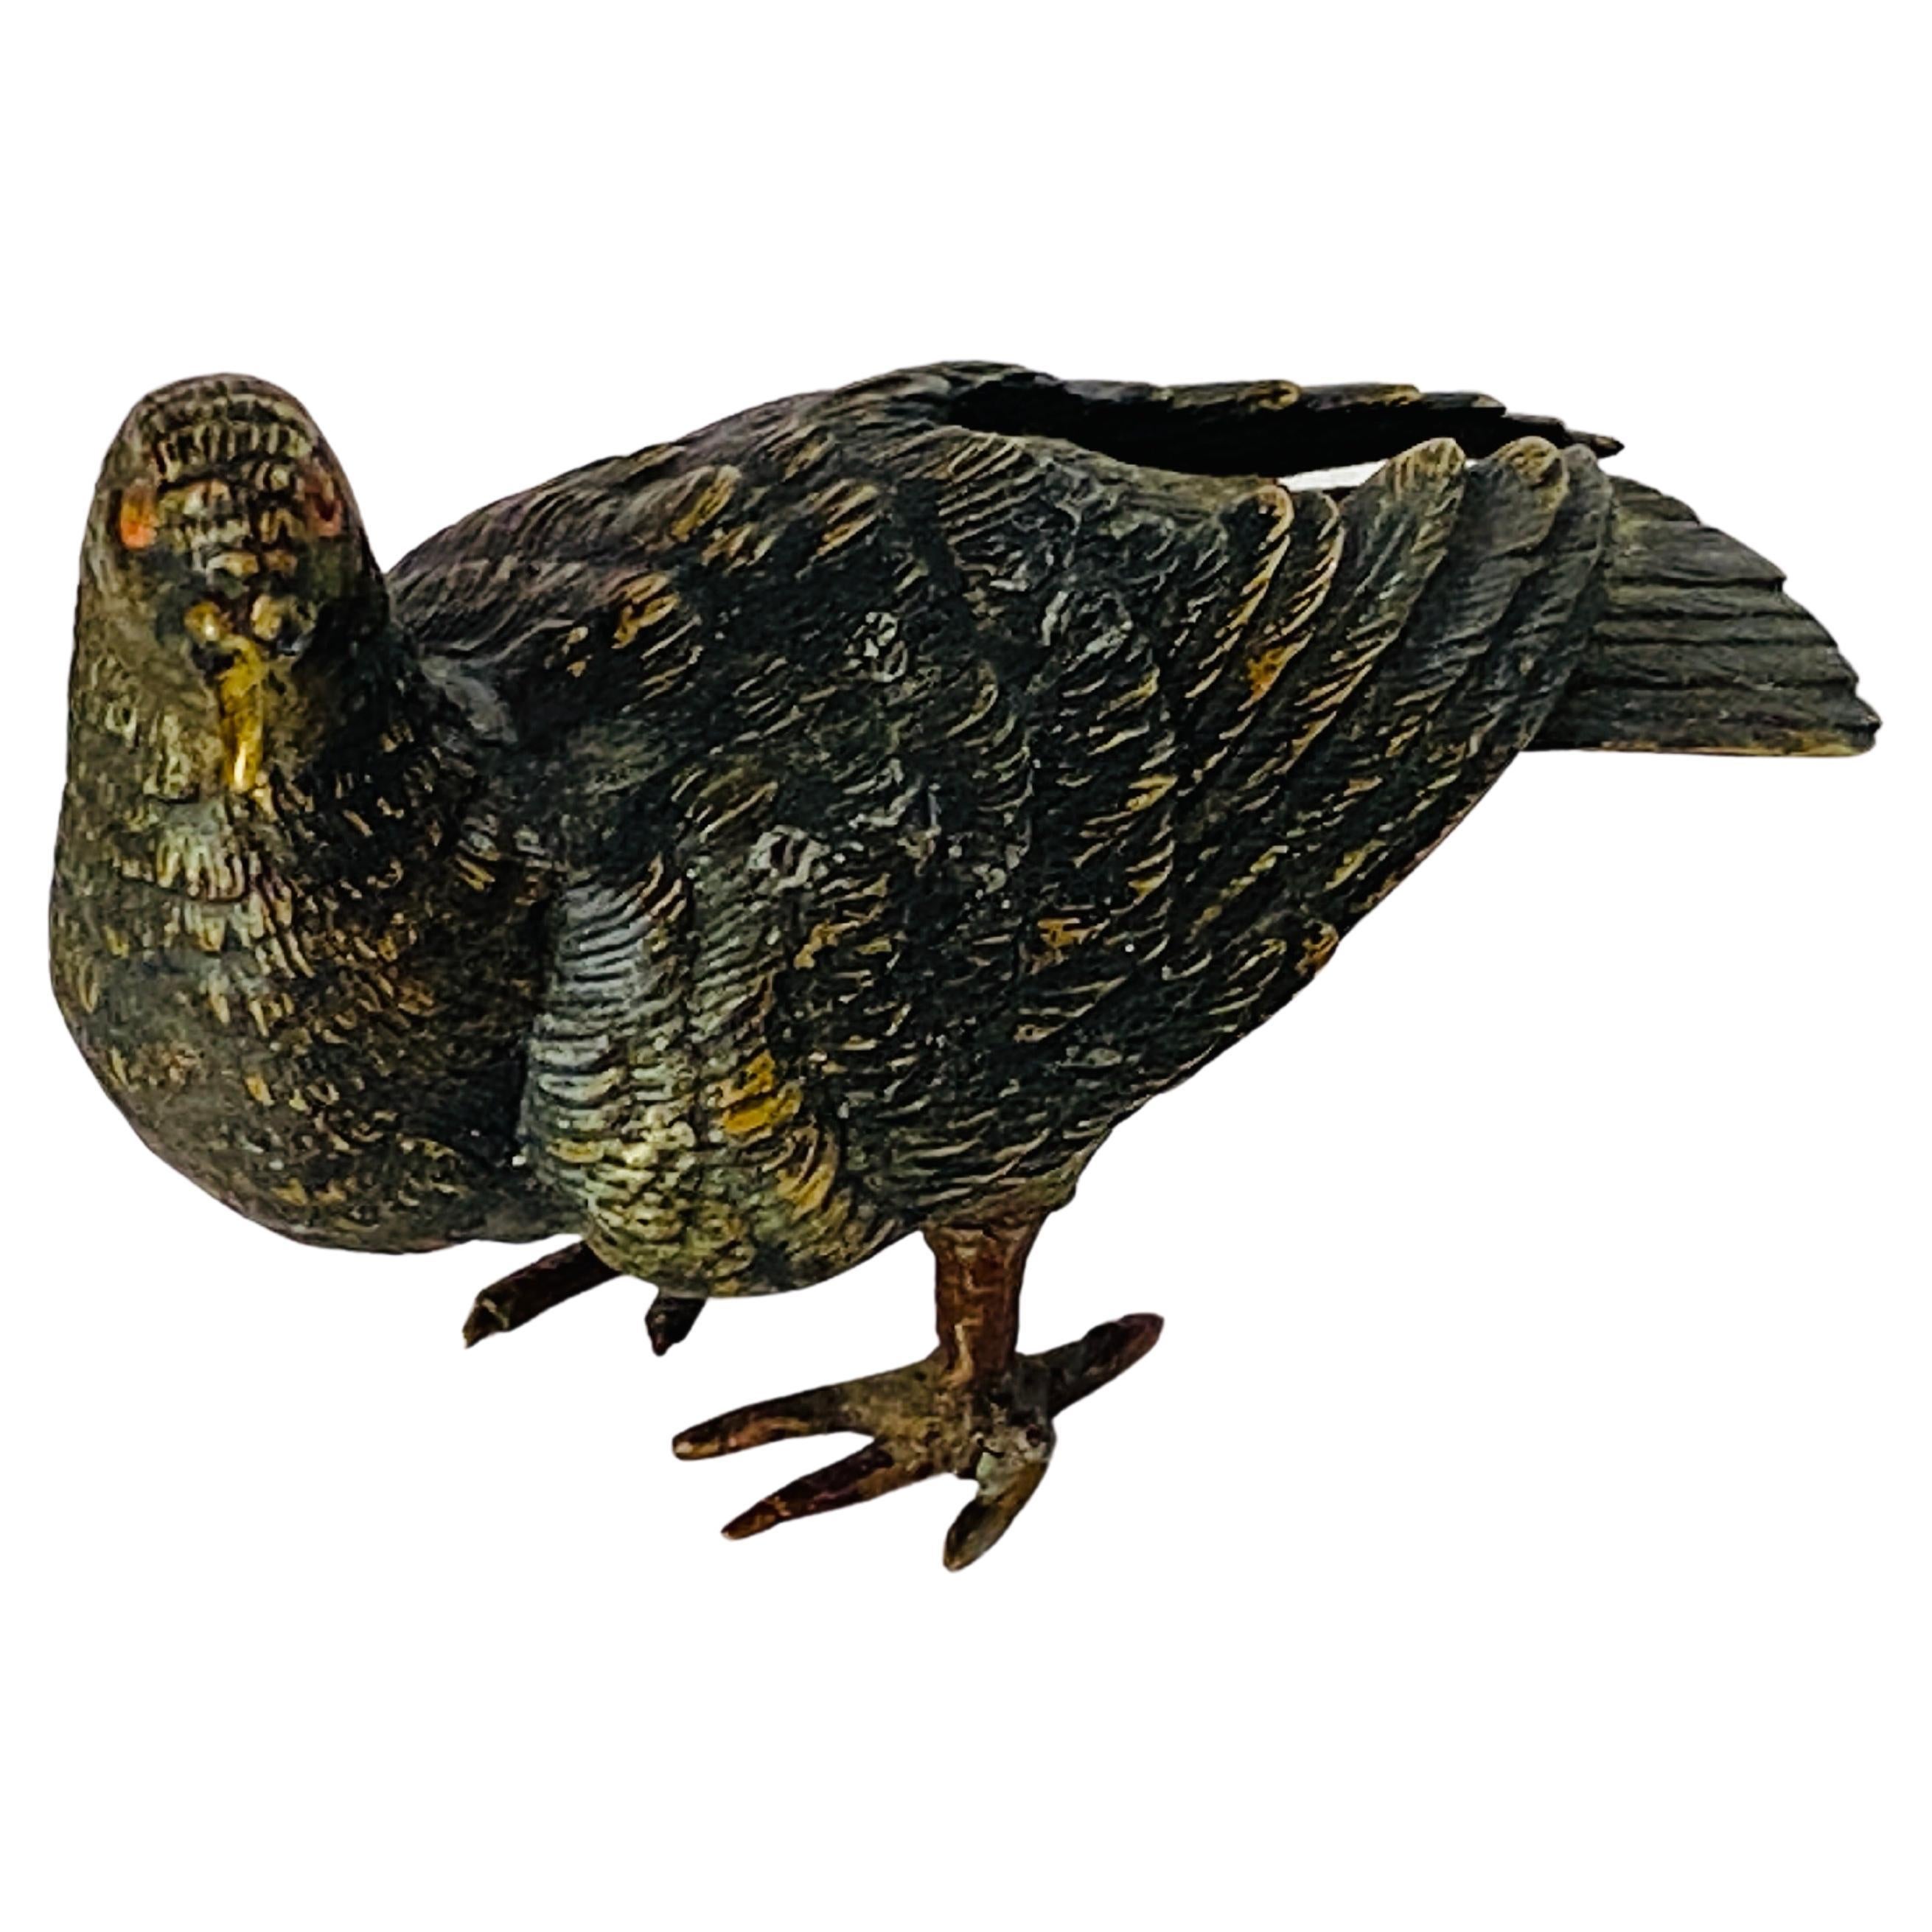 Vienna cold painted bronze Partridge antique figure

Offered is a Viennese cold-painted bronze figure of a partridge dating to the early 20th century. He shows an antique patina with expected losses to the original paint.